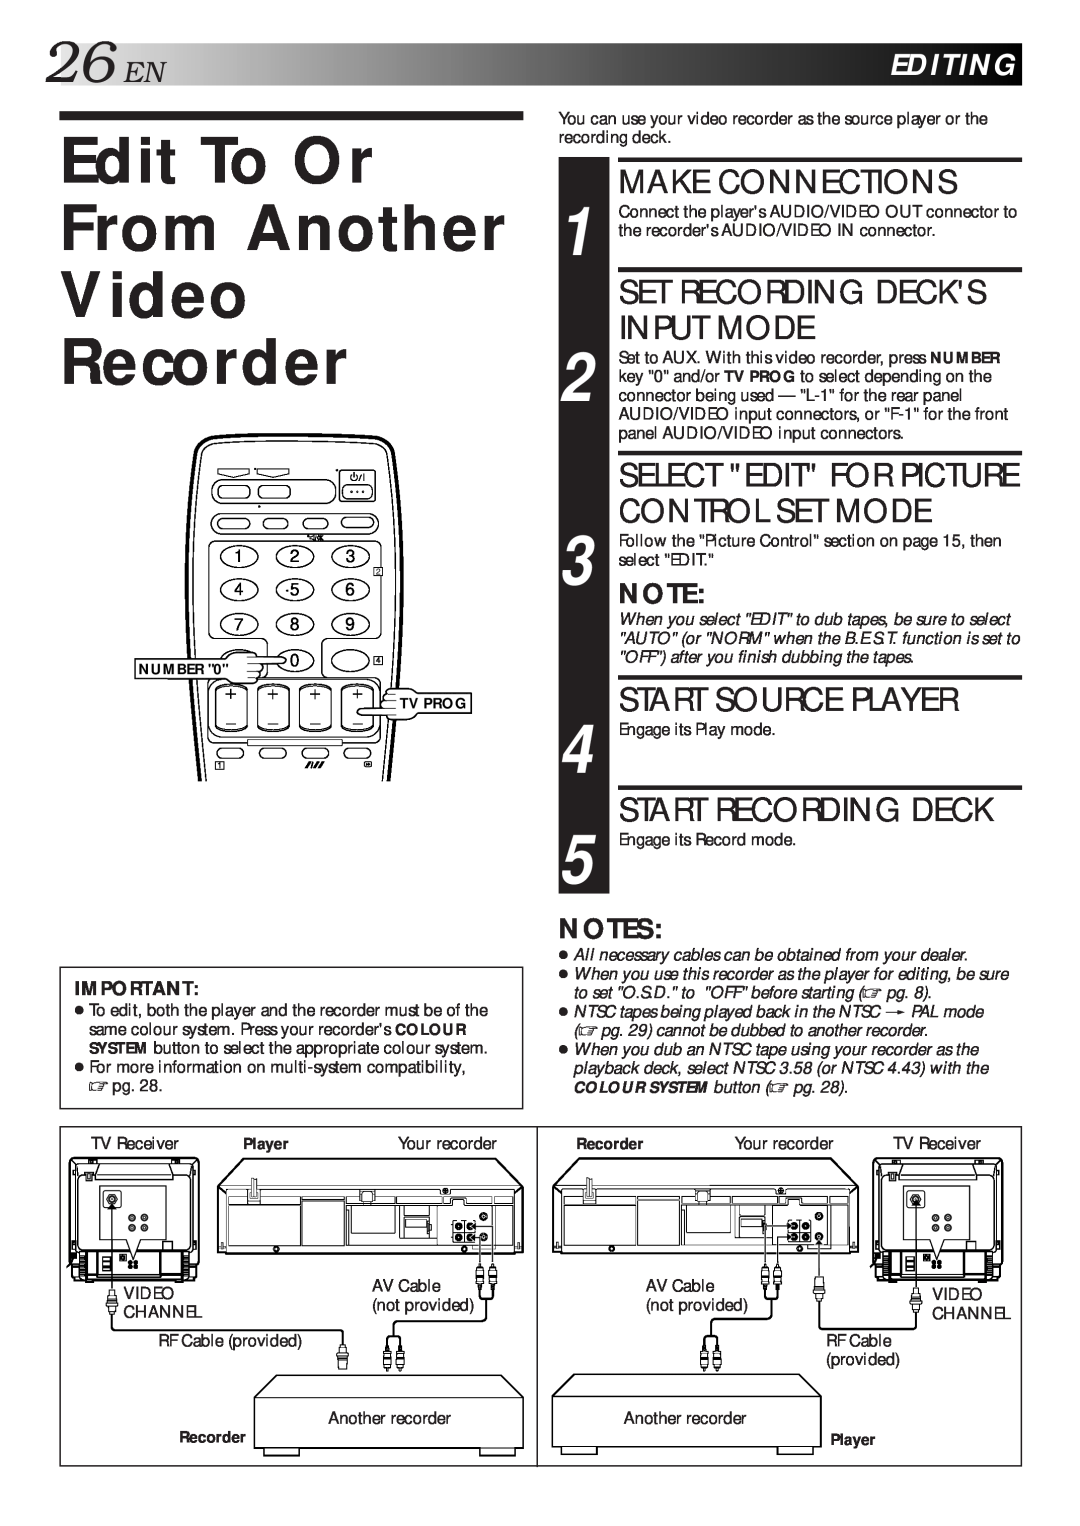 JVC HR-J461MS Edit To Or From Another Video Recorder, 26EN, Make Connections, Set Recording Decks Input Mode, Editing 